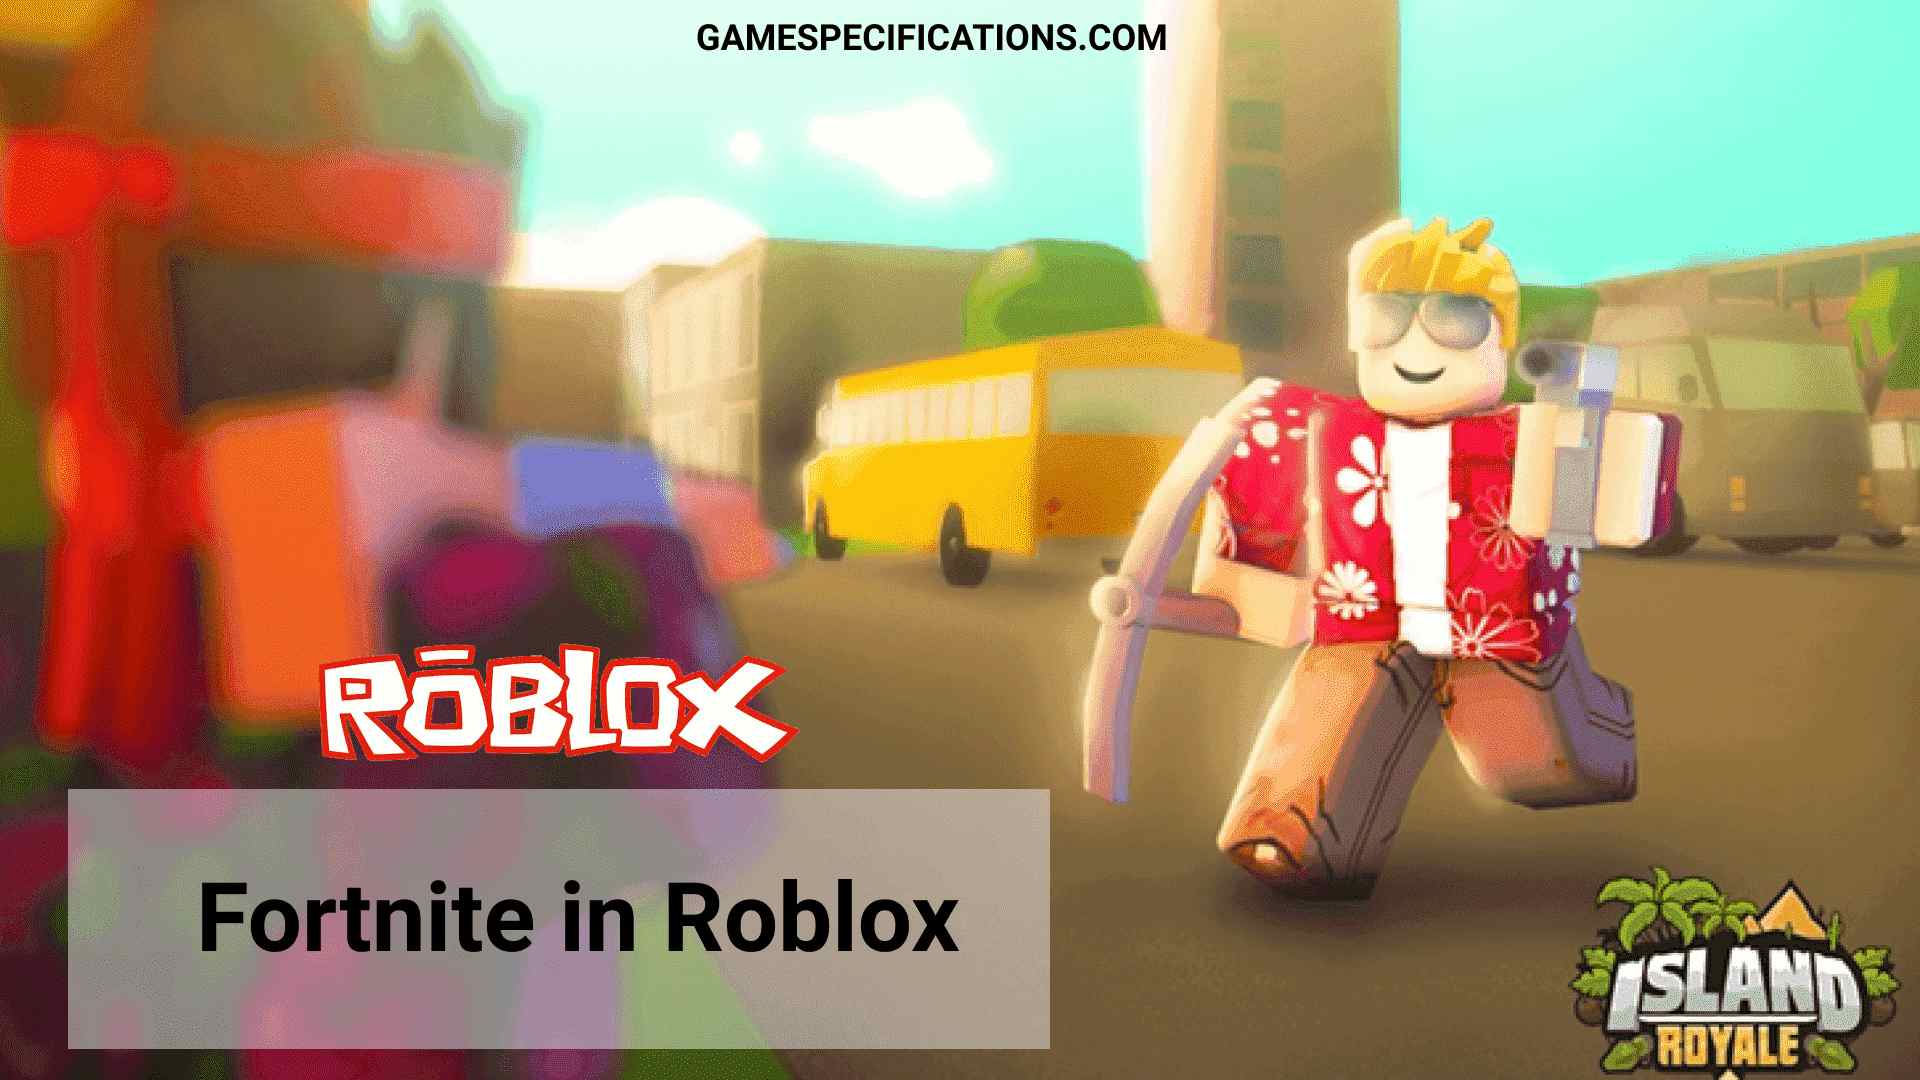 Fortnite Roblox A Native Battle Royale Game Specifications - roblox fortnite island royale codes